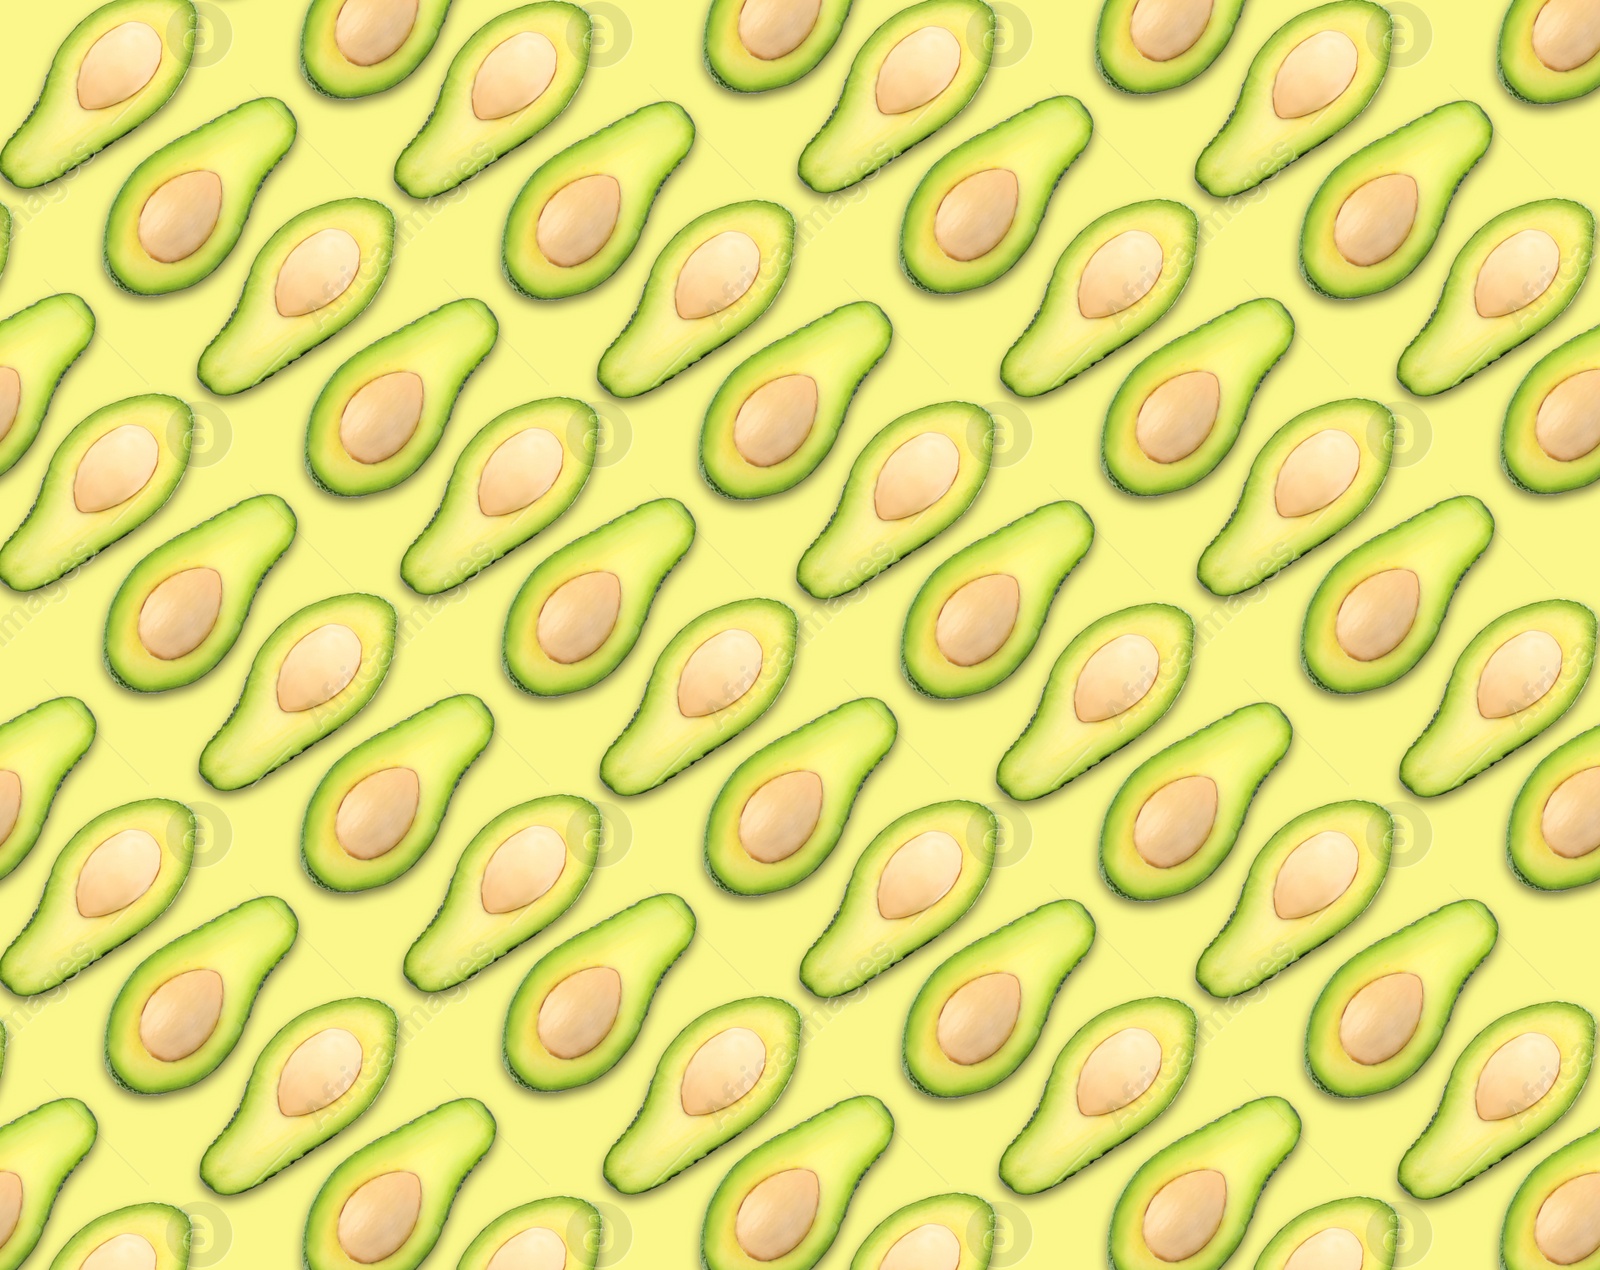 Image of Pattern of avocado halves on pale yellow background